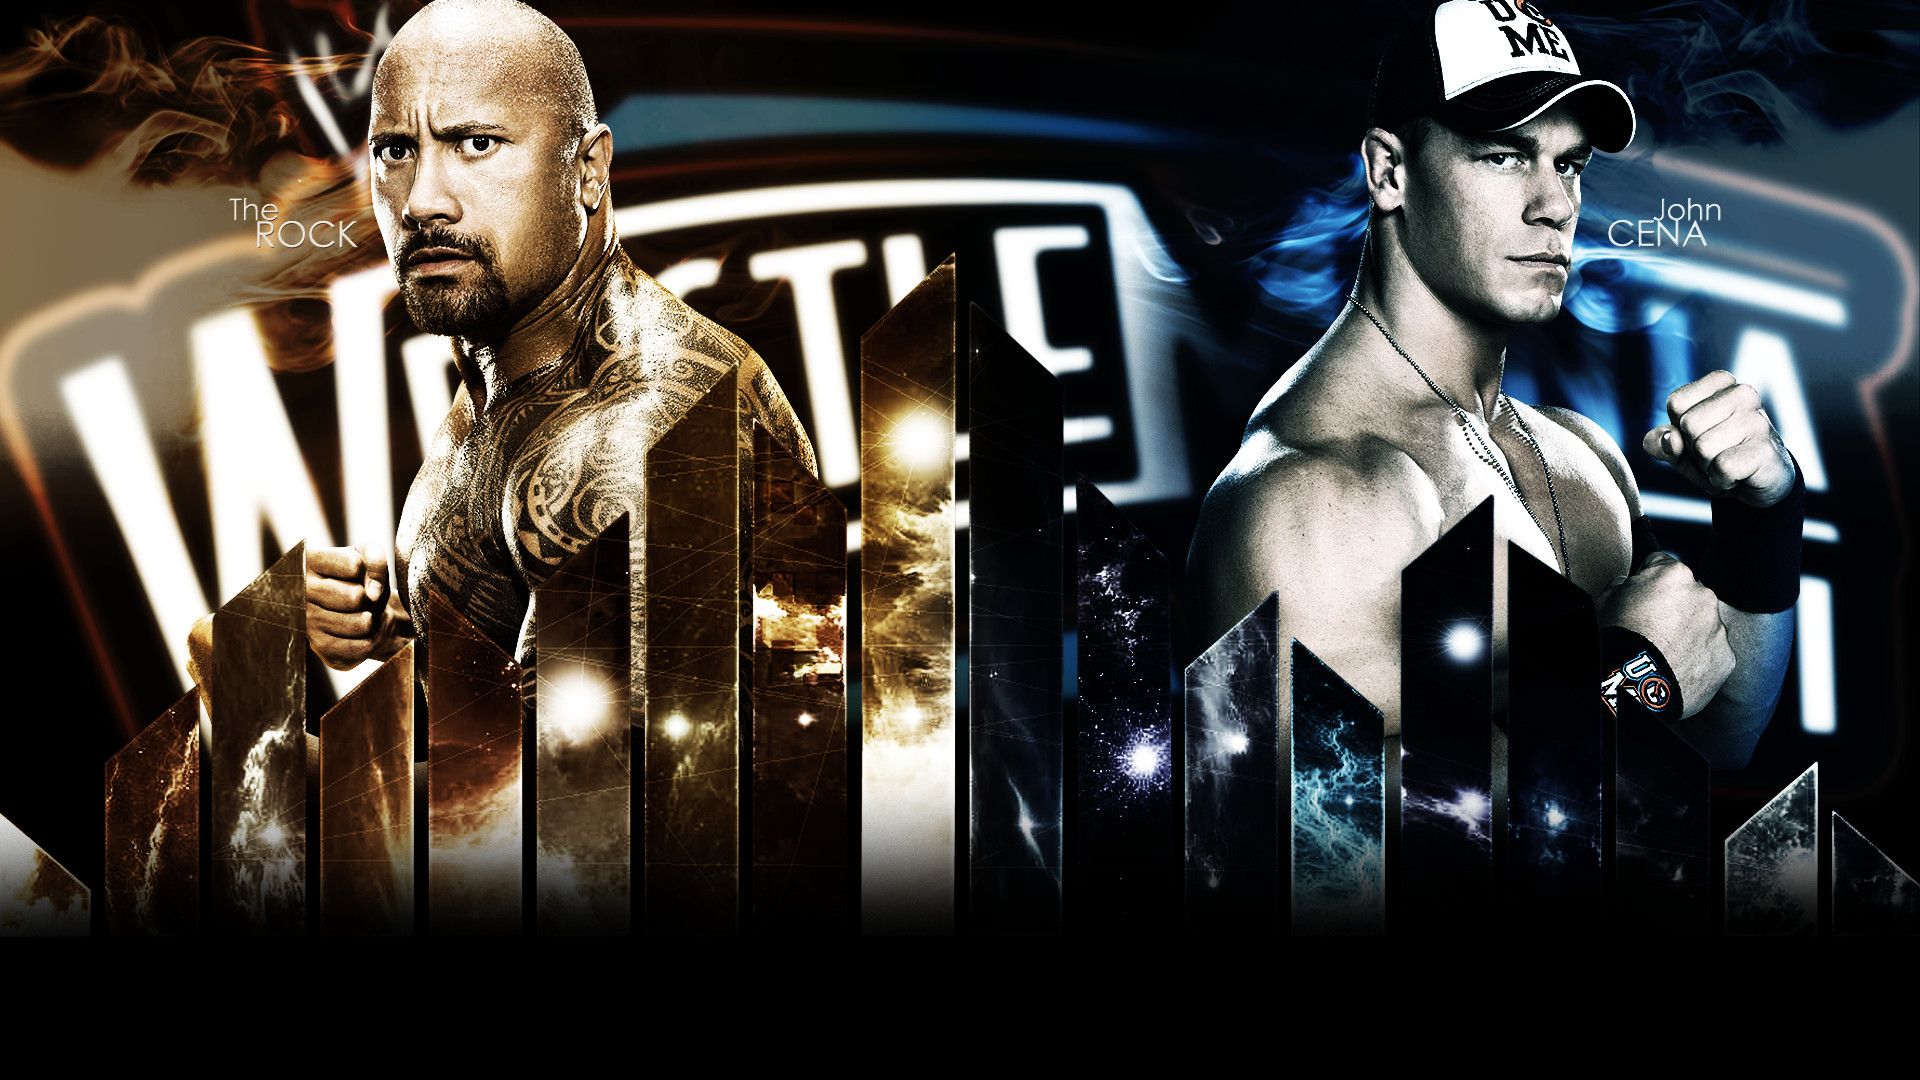 1920x1080 The Rock HD Pictures 7 whb #TheRockHDPictures #TheRock #WWETheRock #wwe # wrestling